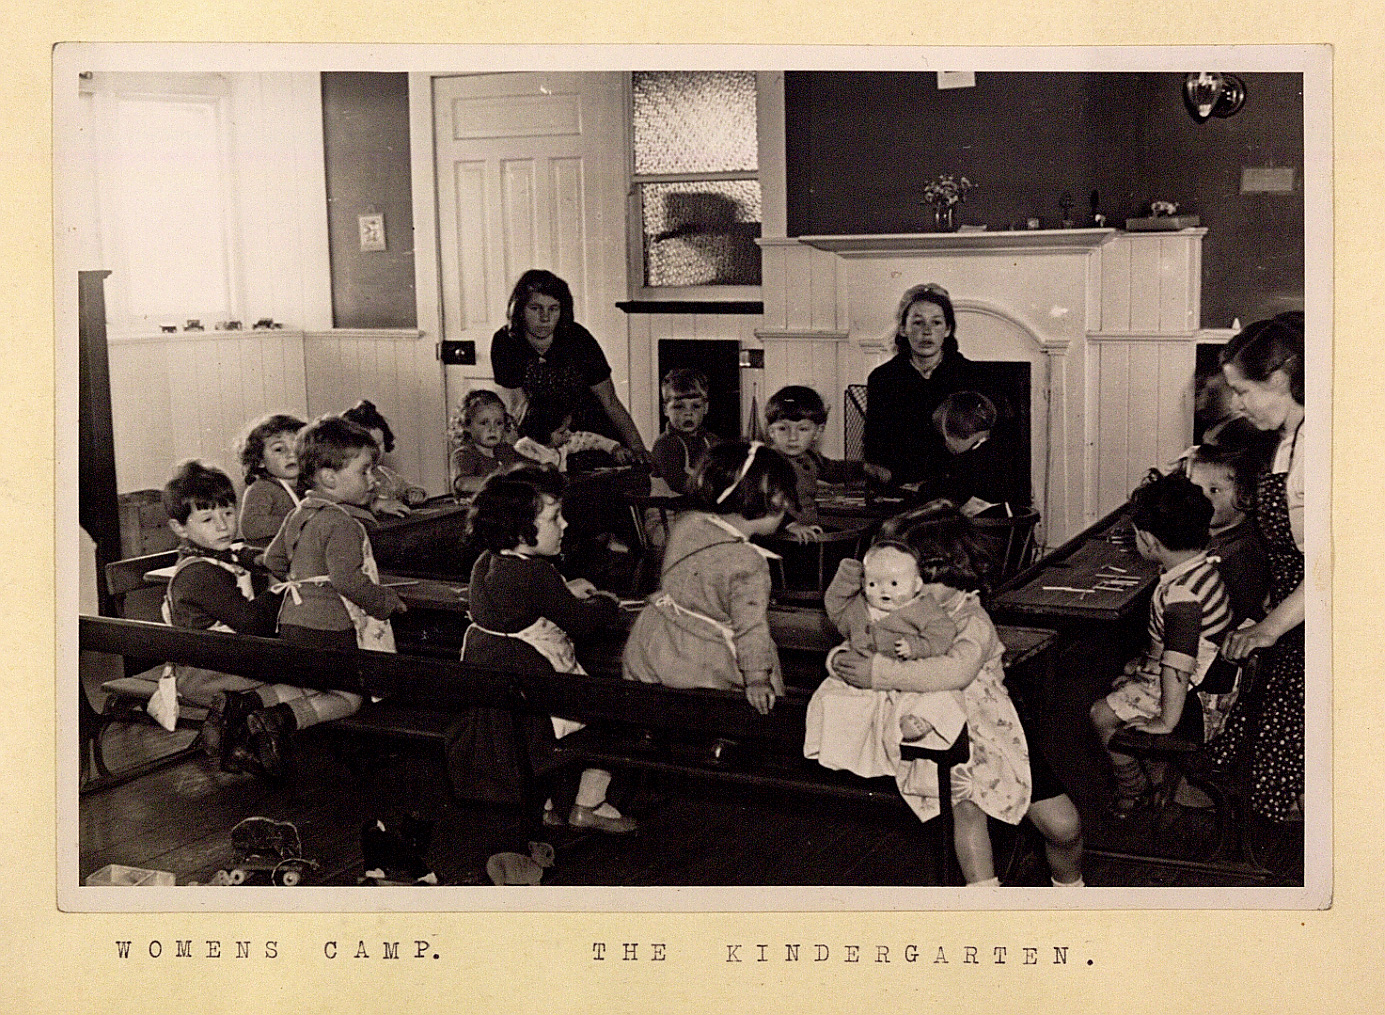 Monochrome photograph of a group of young children sitting at wooden benches inside a room.